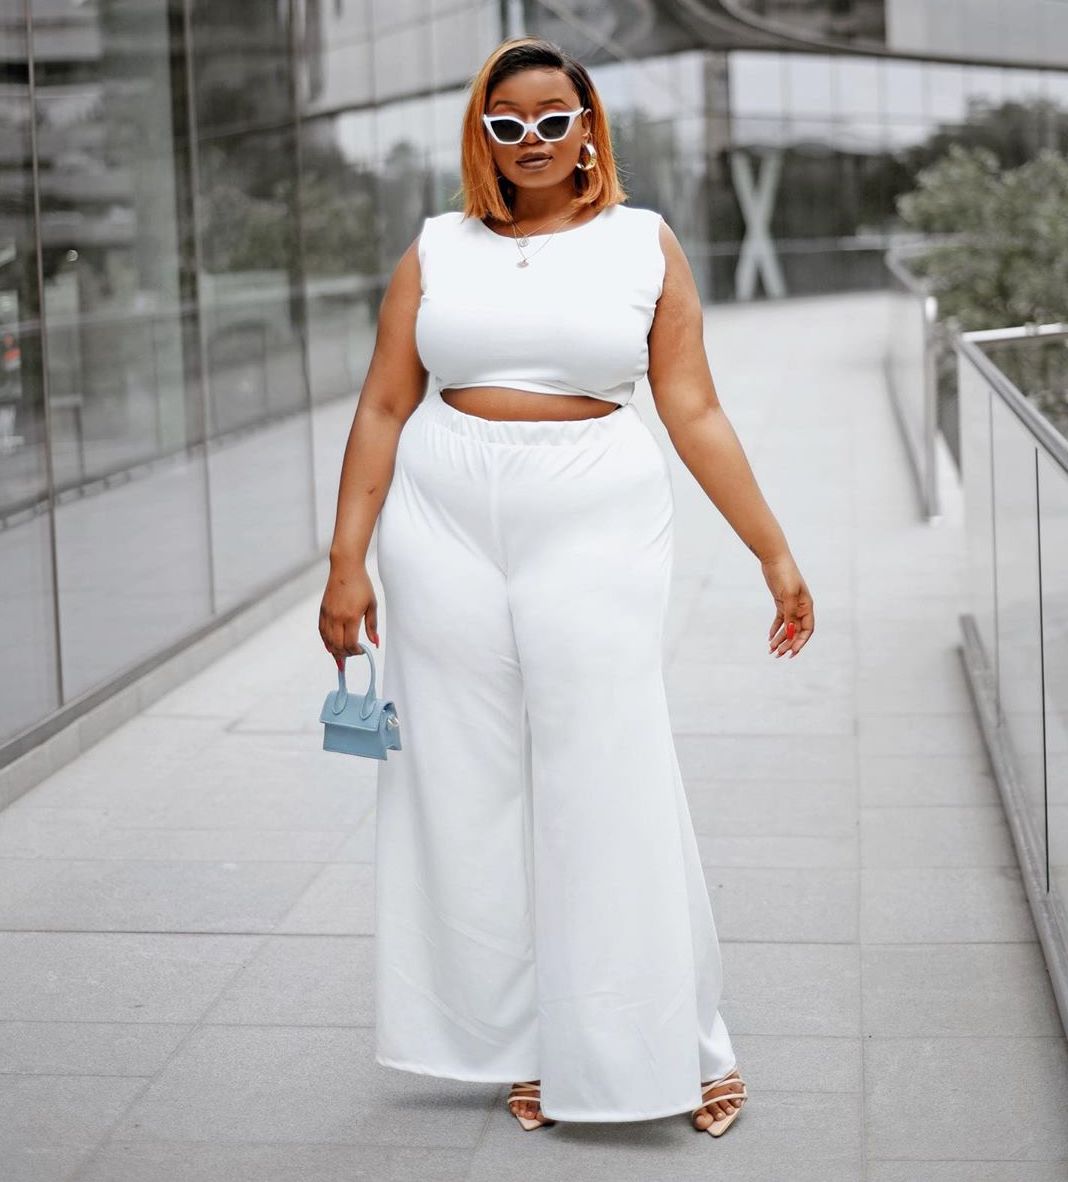 BN Style Your Curves: Lesego “Thickleeyonce” Legobane | BellaNaija